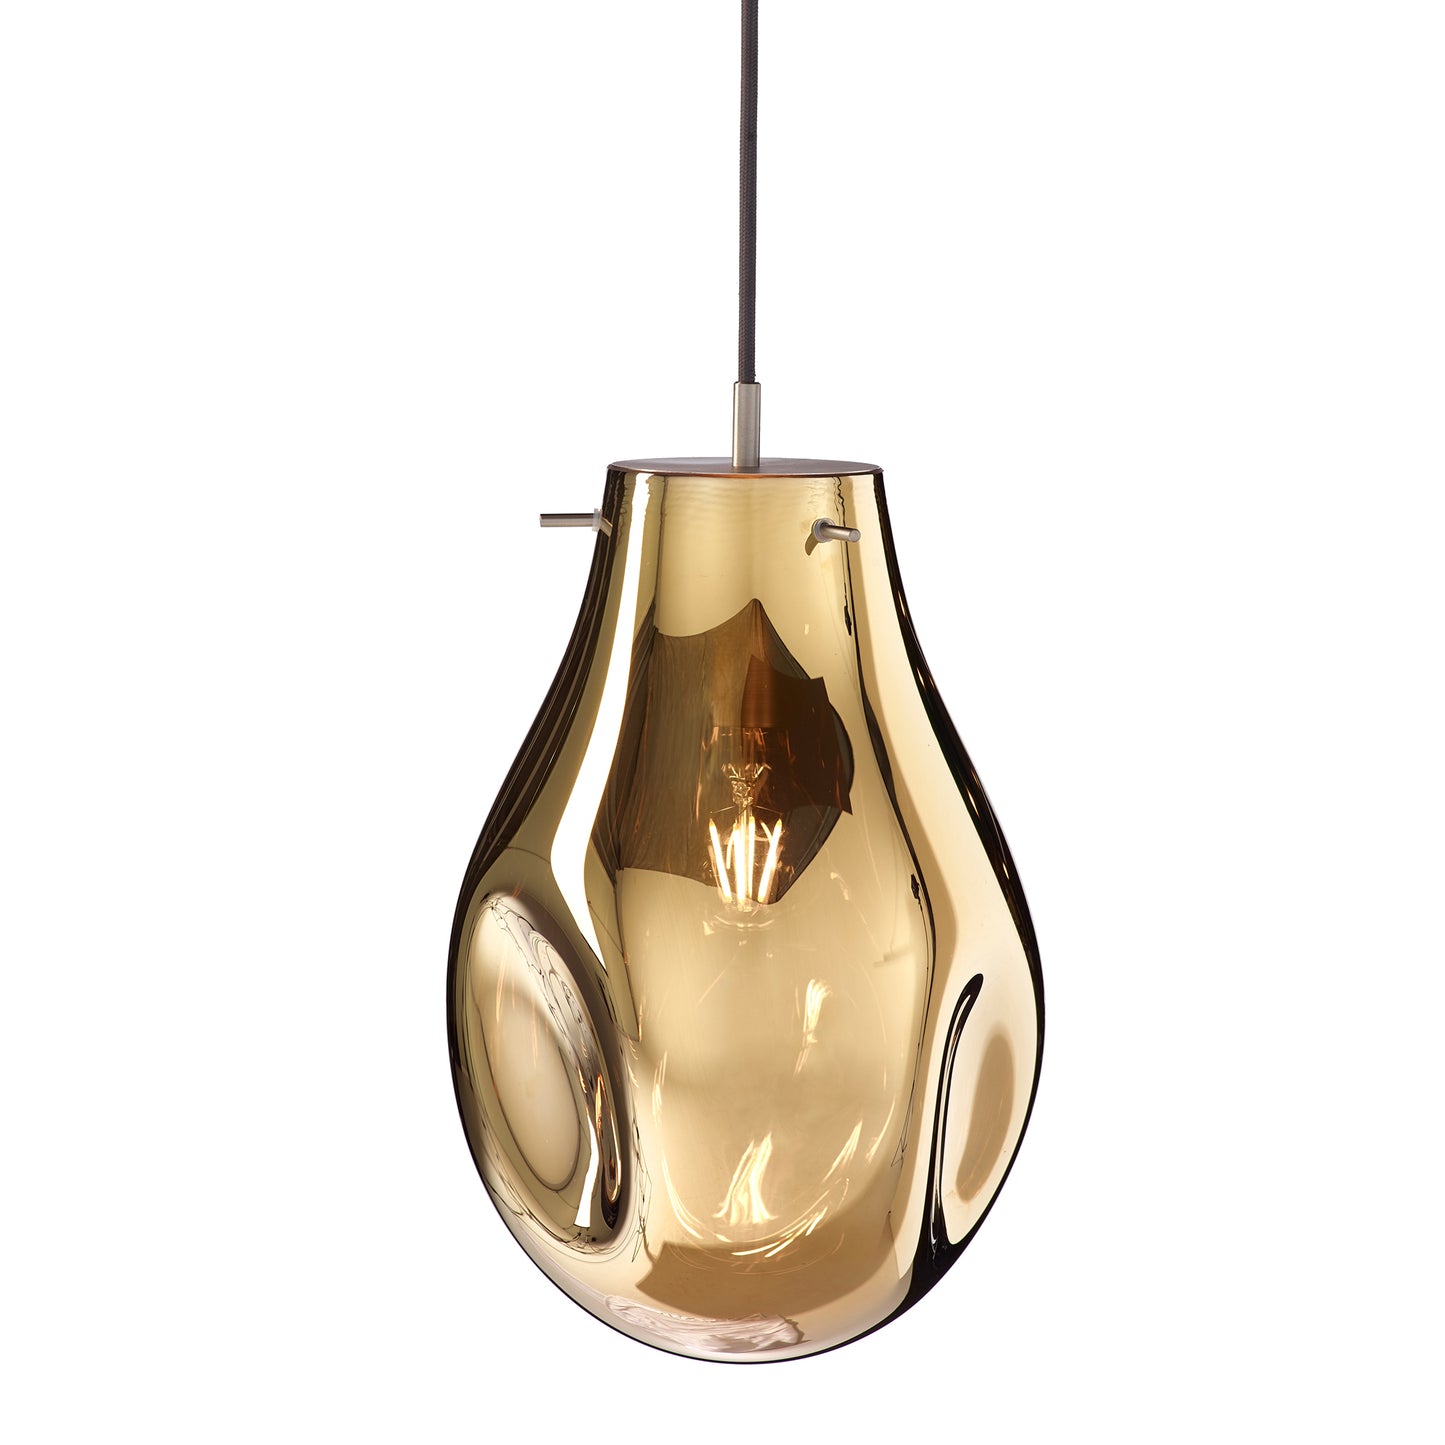 BOMMA - SOPA PENDANT LARGE - from $1,620.00